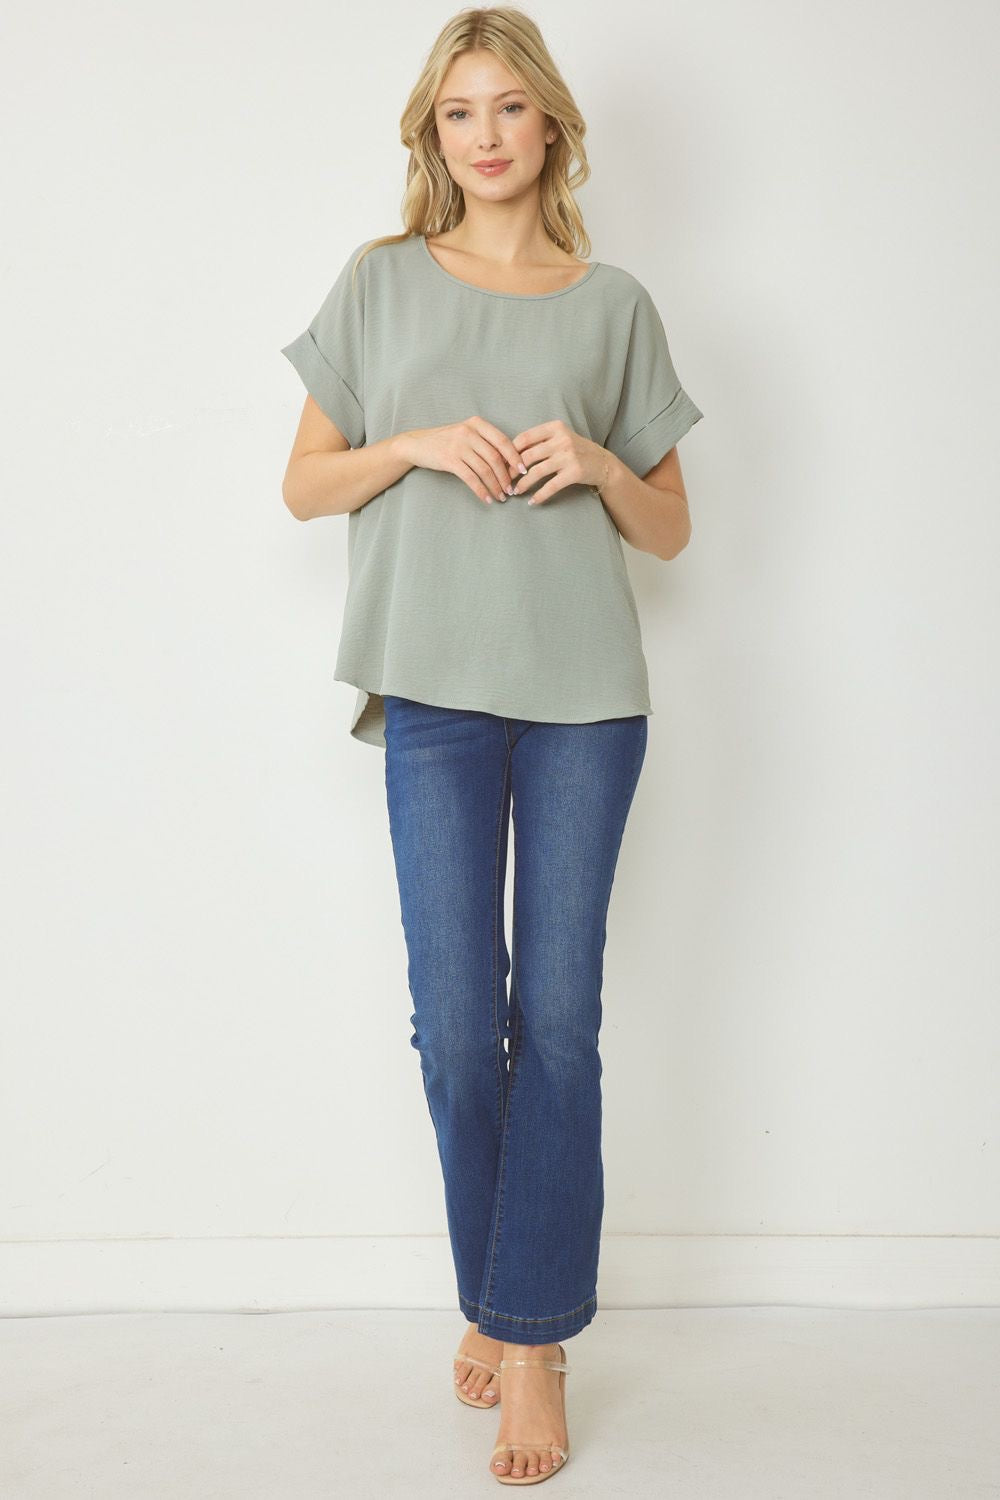 Entro® Scoop-Neck Top With Rolled Sleeve Detail Available in Small to 2XL